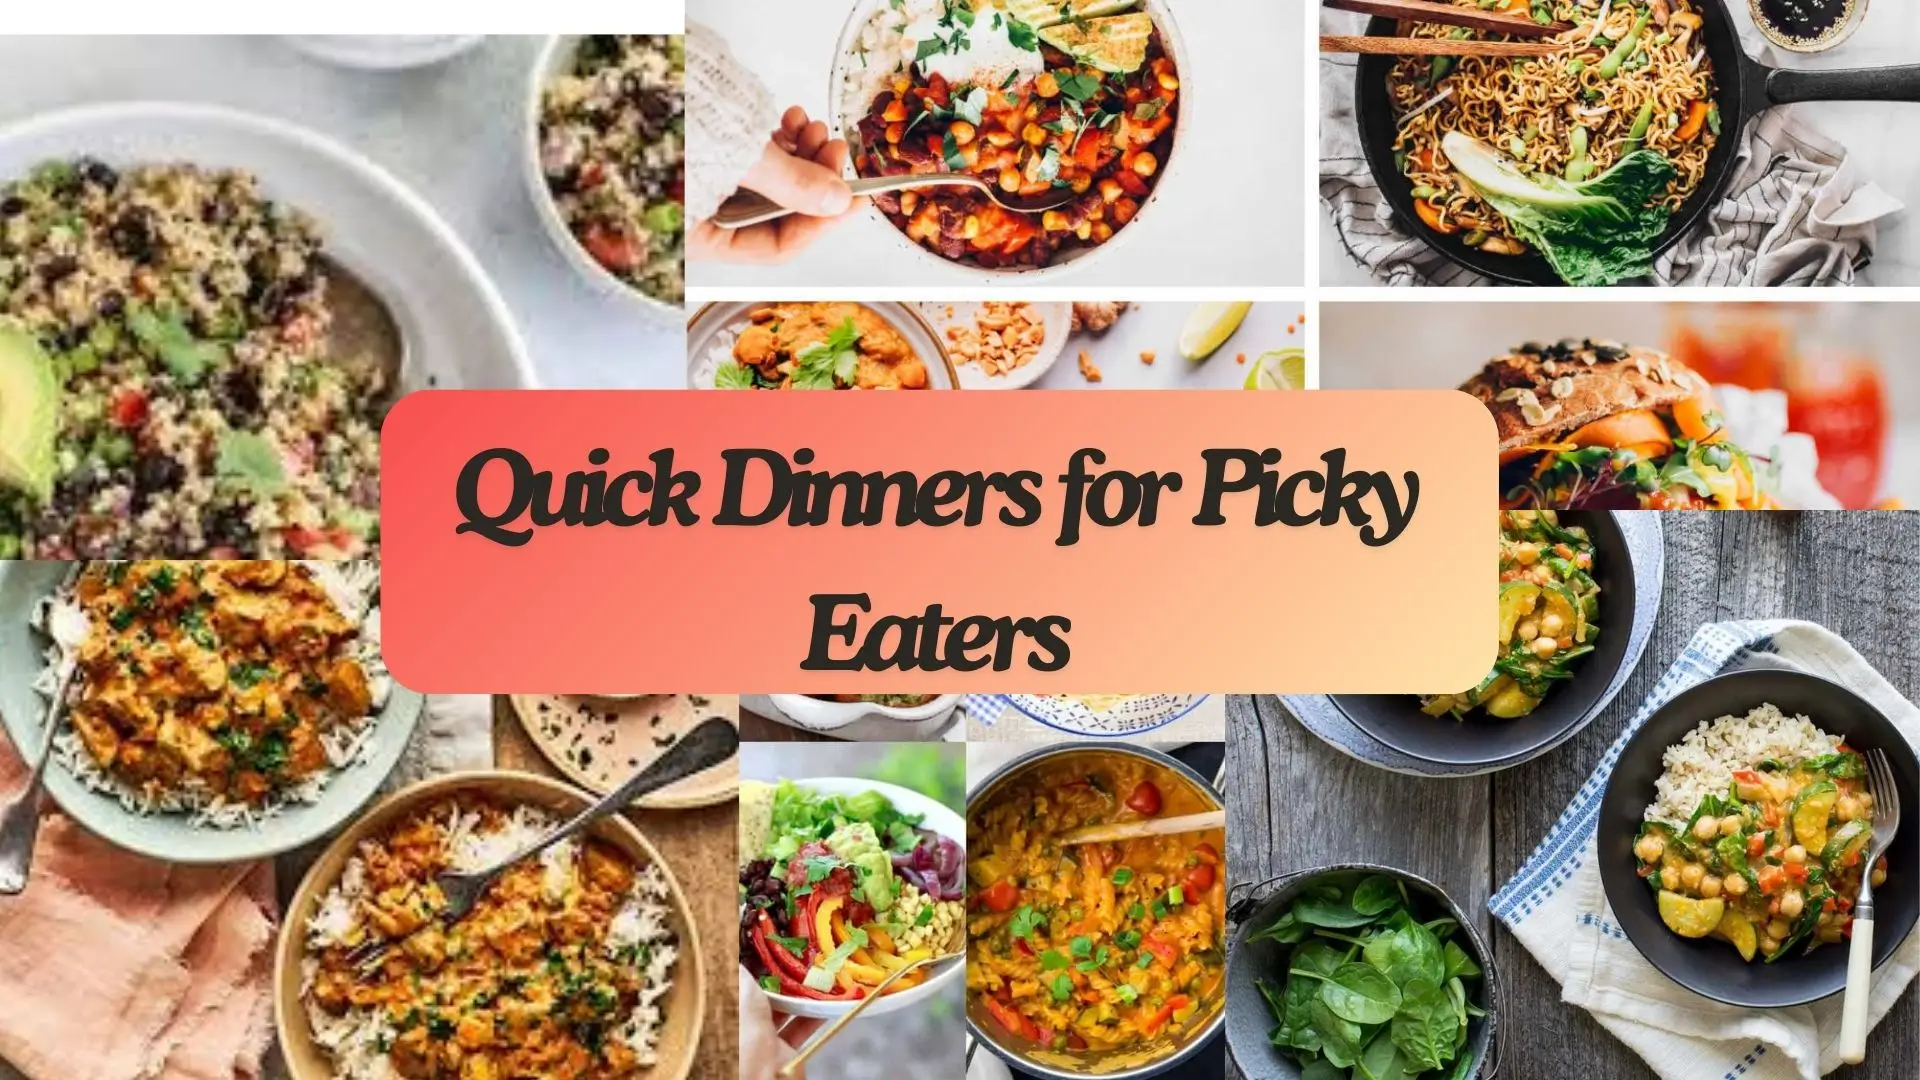 Quick Dinners for Picky Eaters